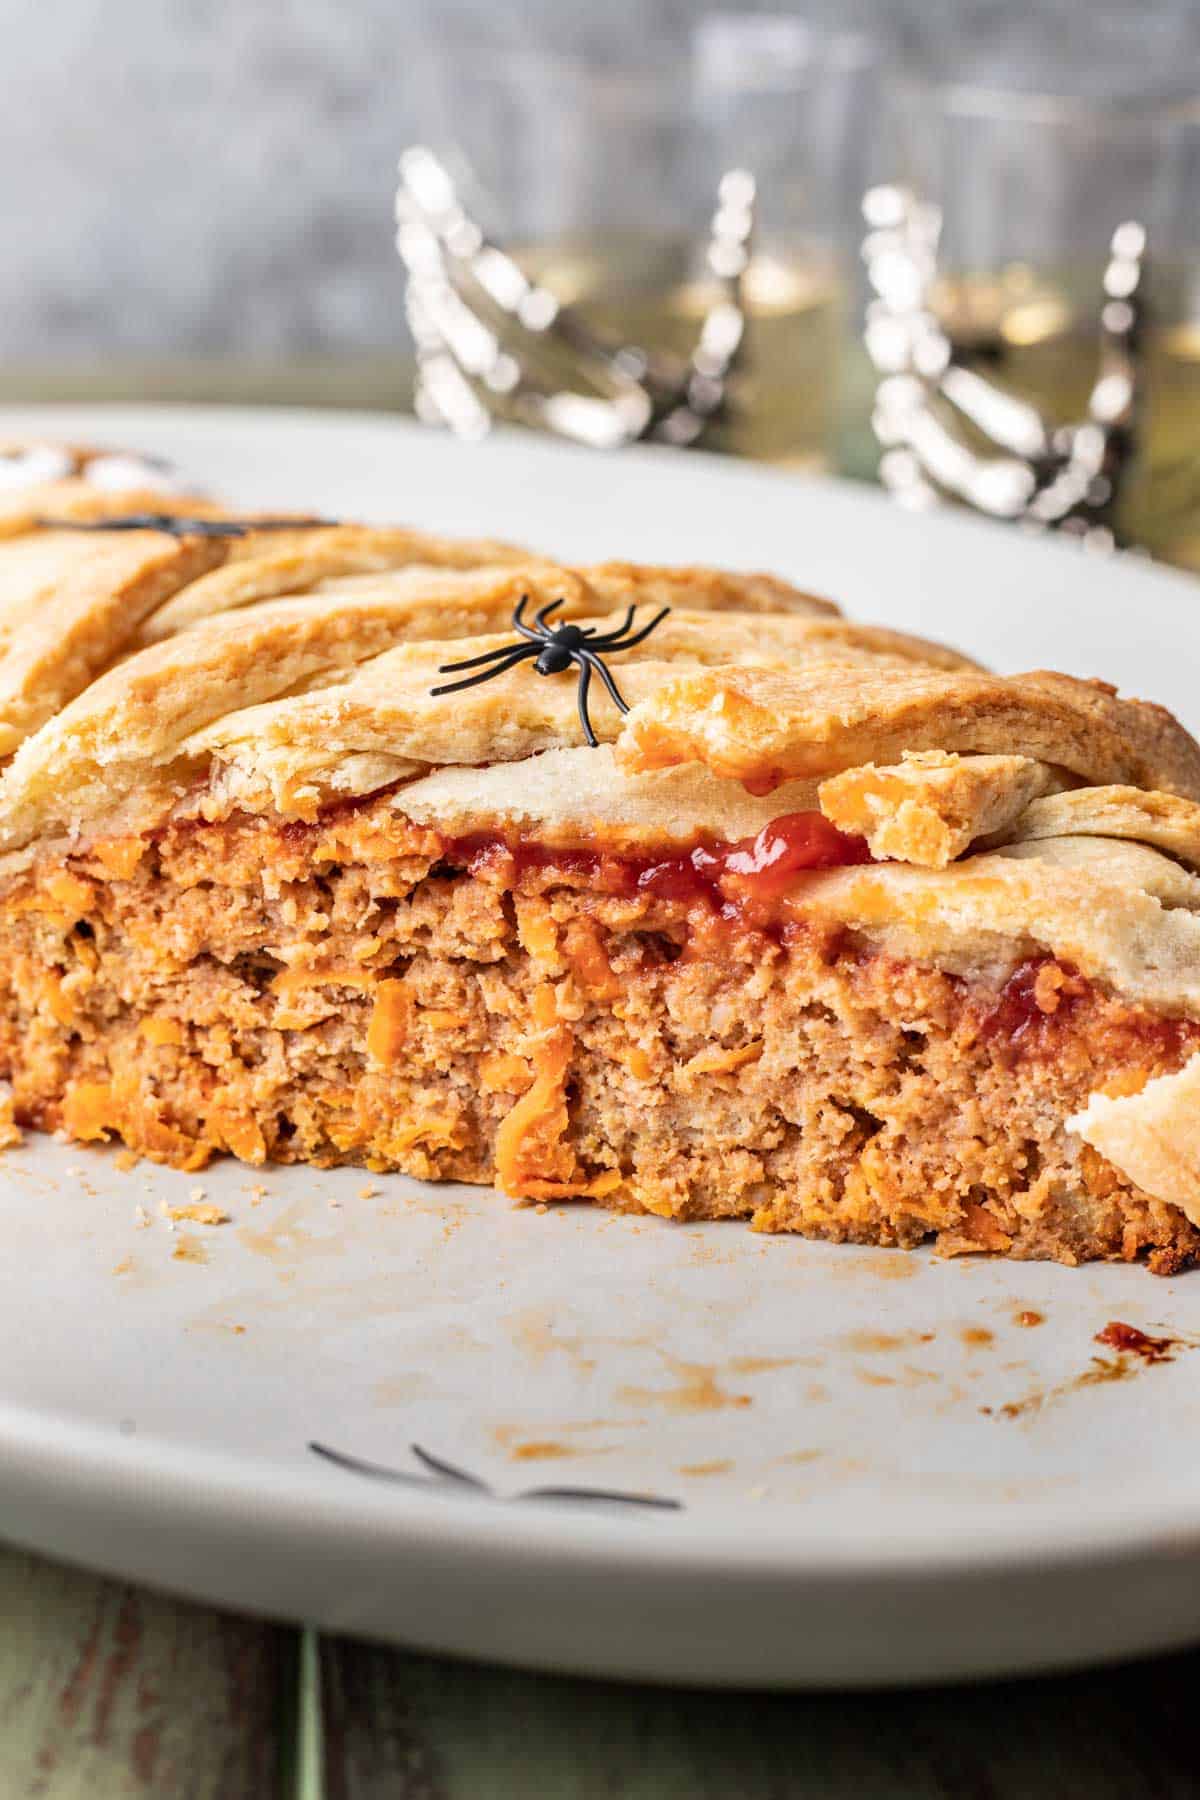 Sliced mummy meatloaf to show the internal texture of the meat.